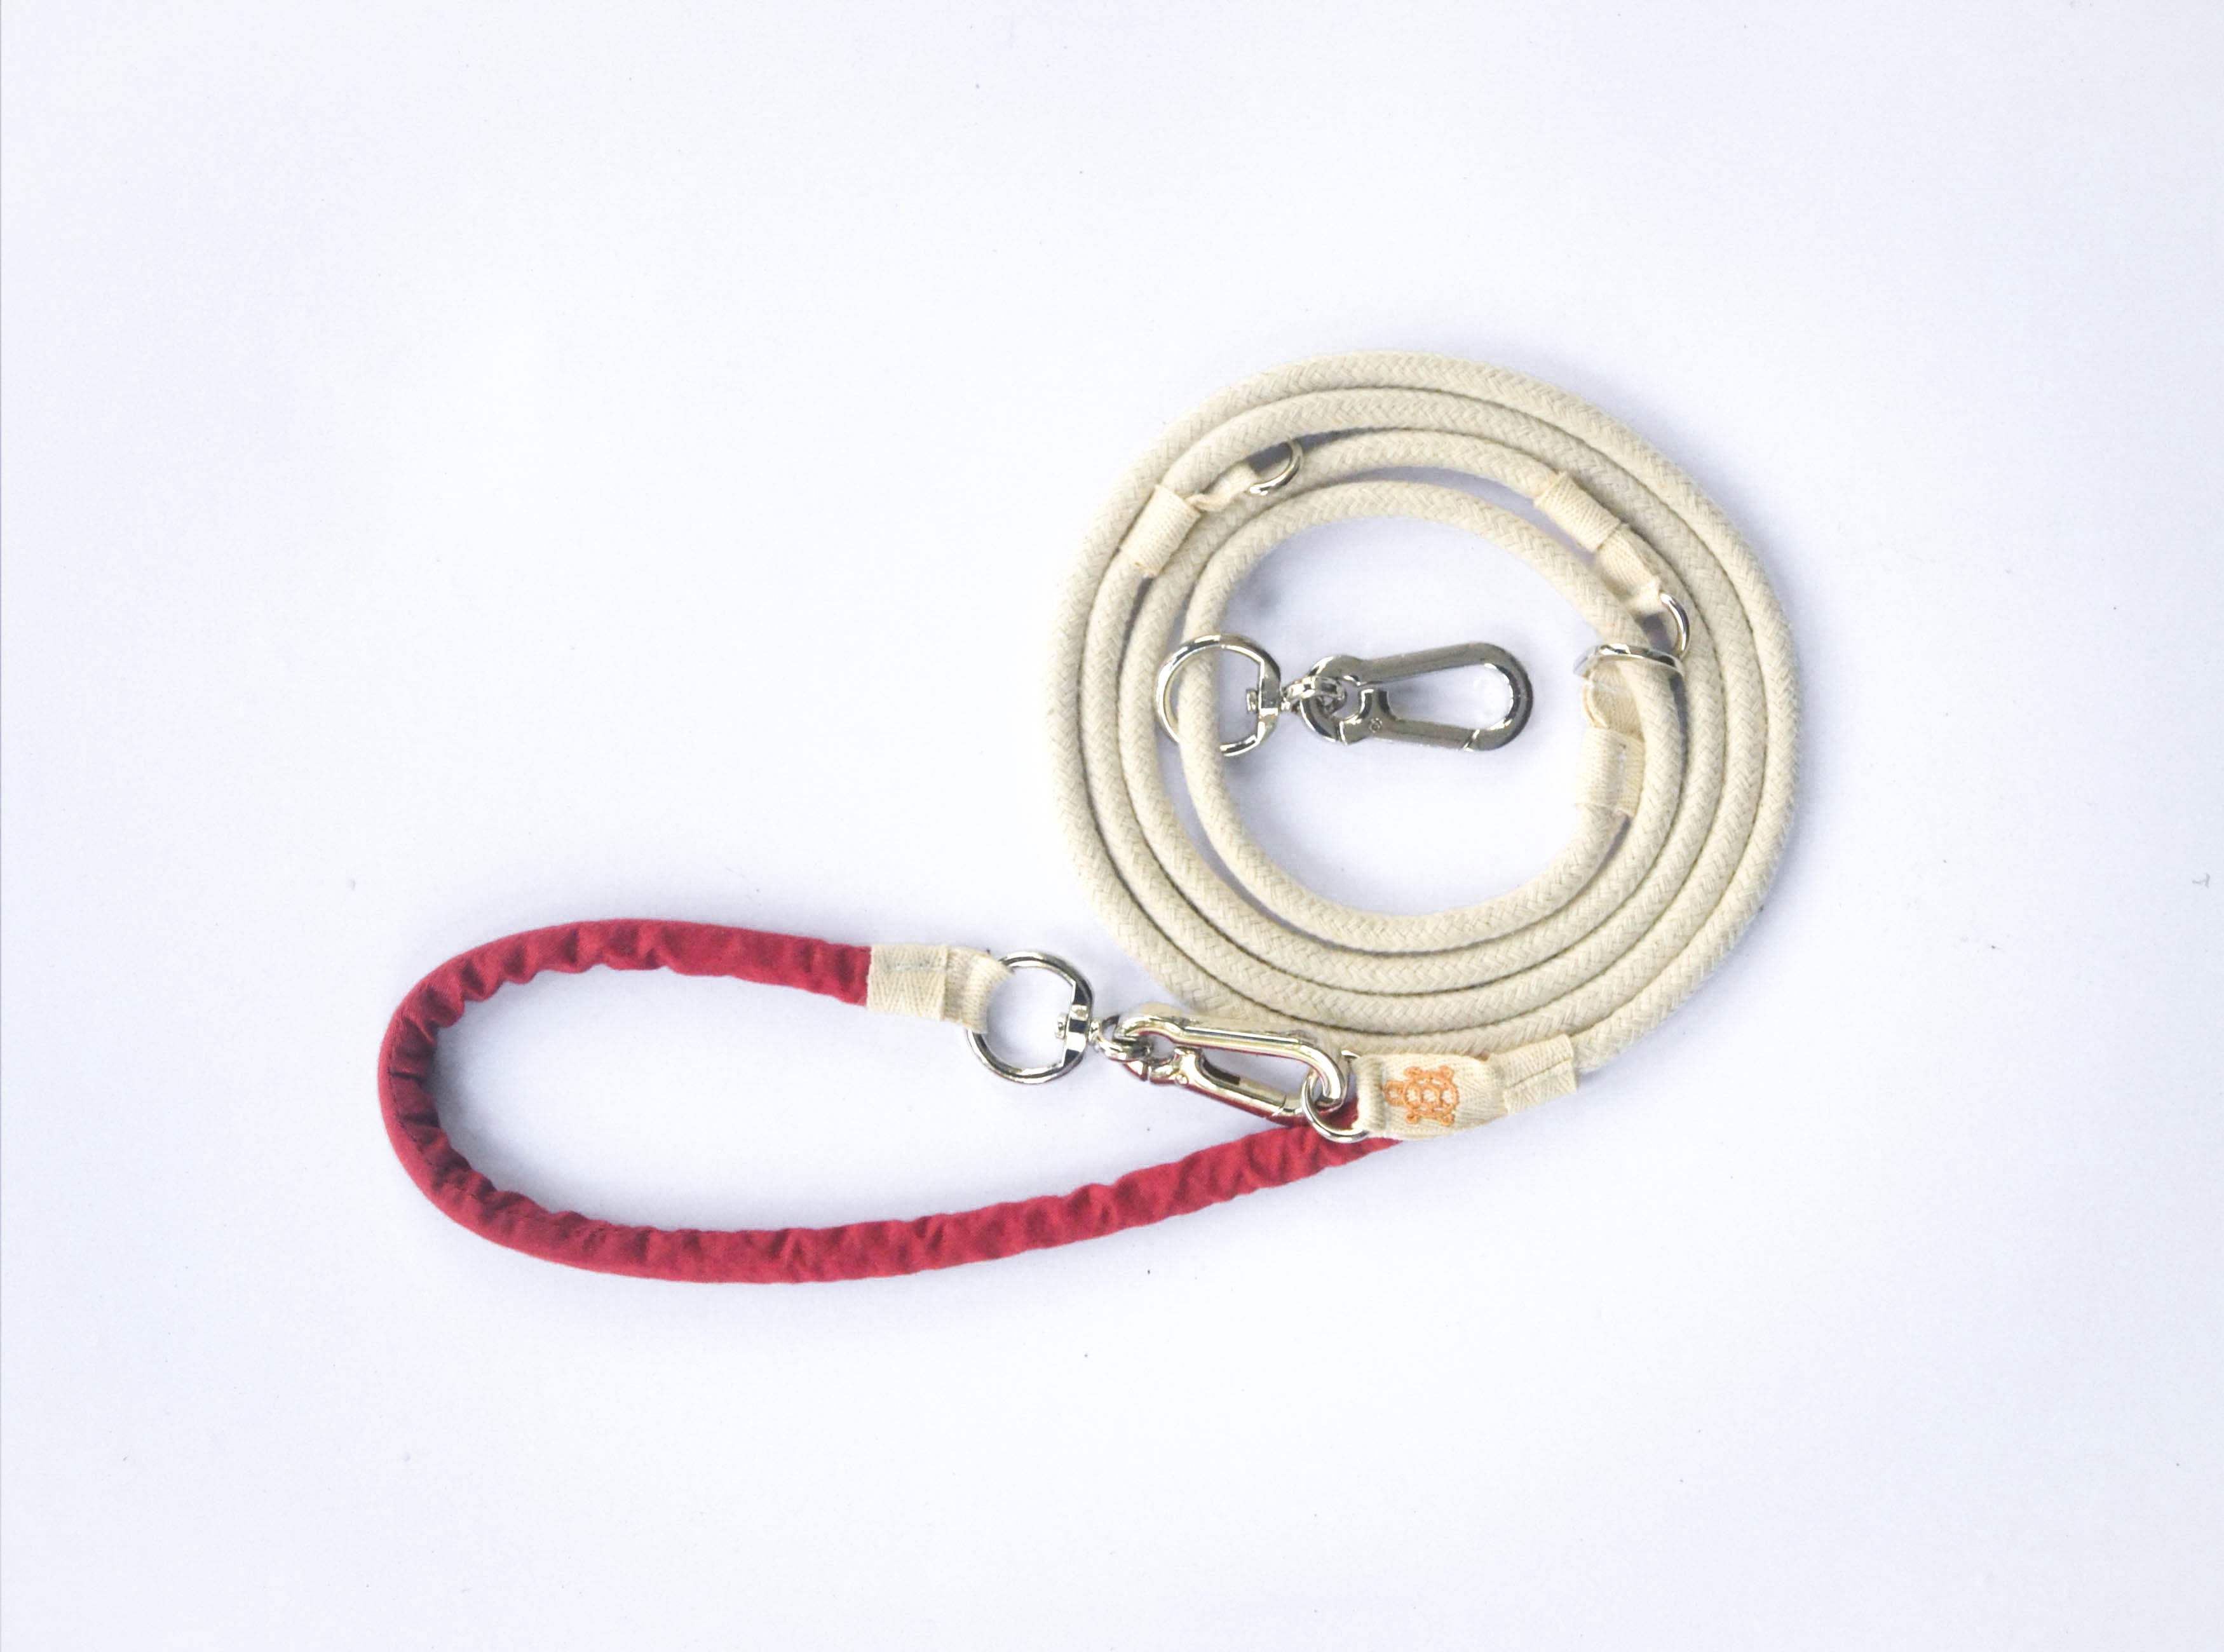 8 in 1 - Multifunctional Dog Leash - Red Tide